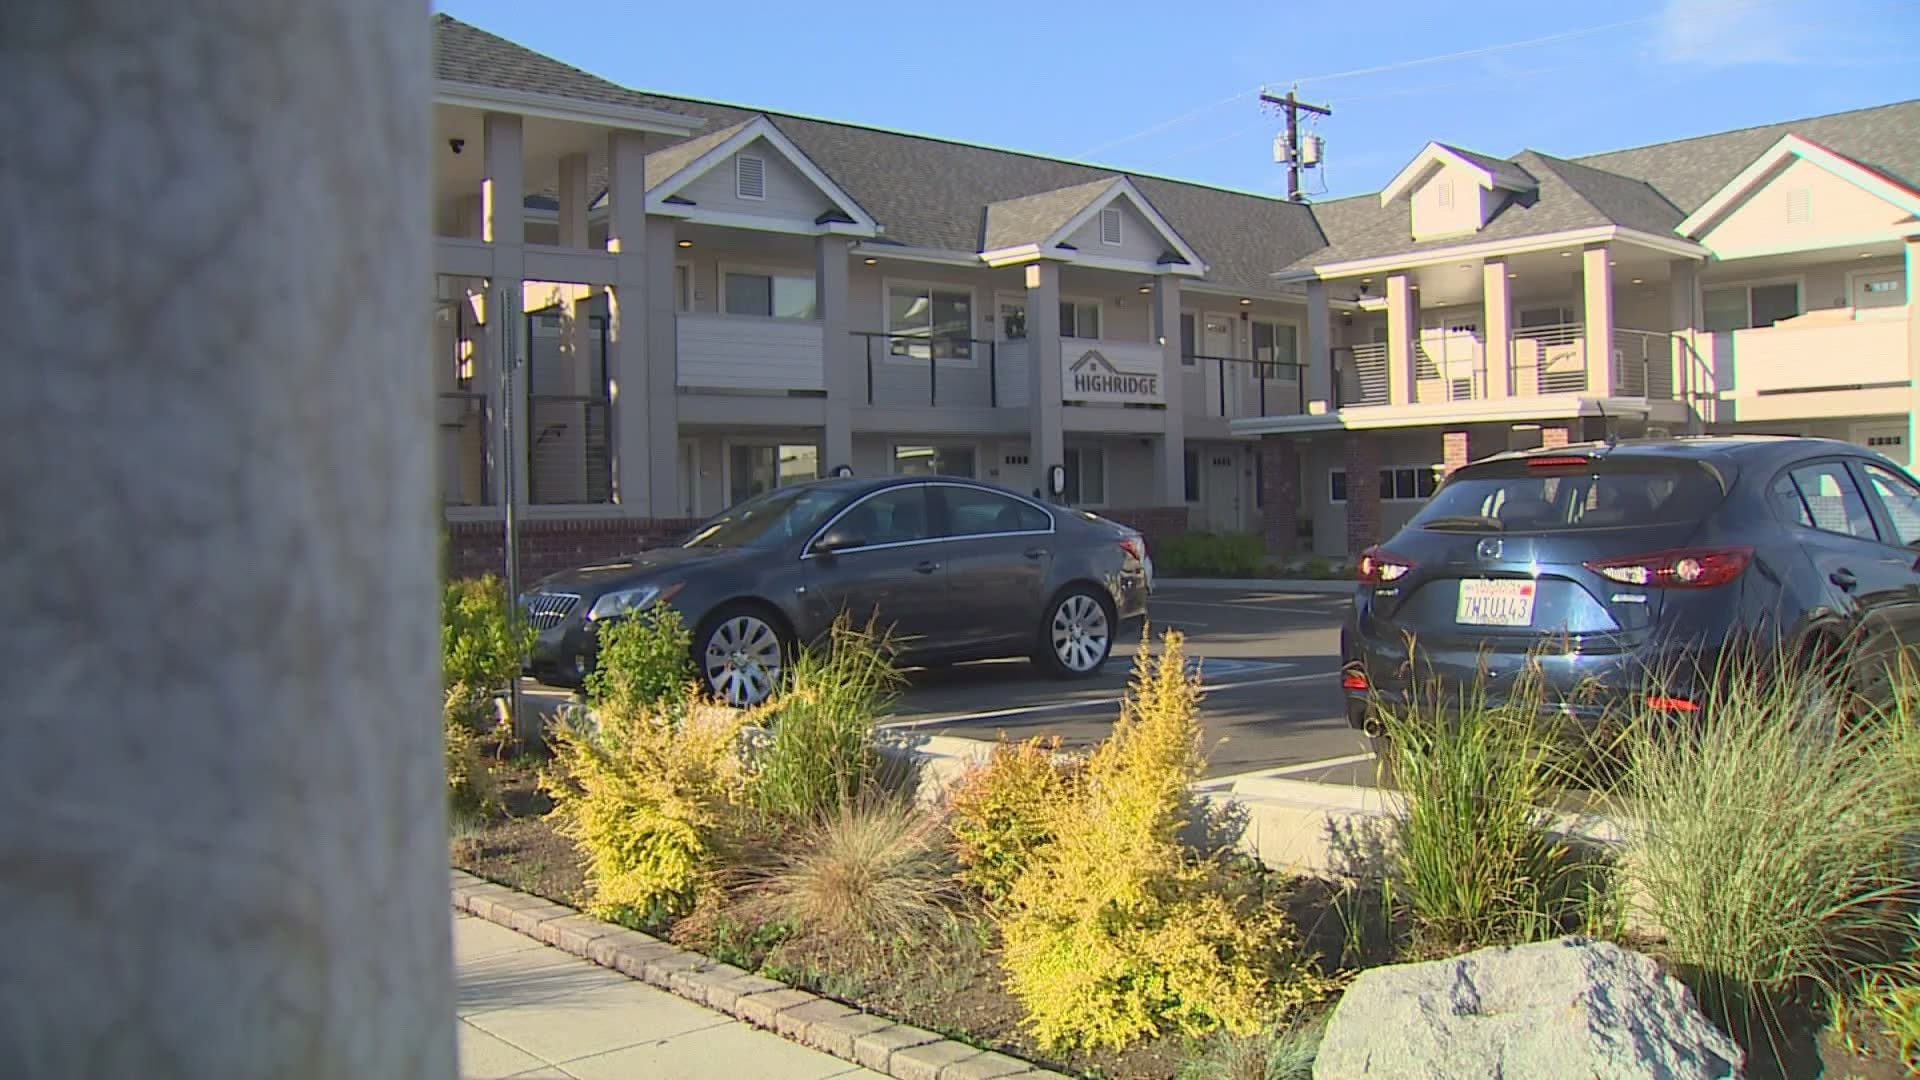 The eviction moratorium is set to expire on June 30, but Gov. Jay Inslee said the state needs time for rental services to catch-up.